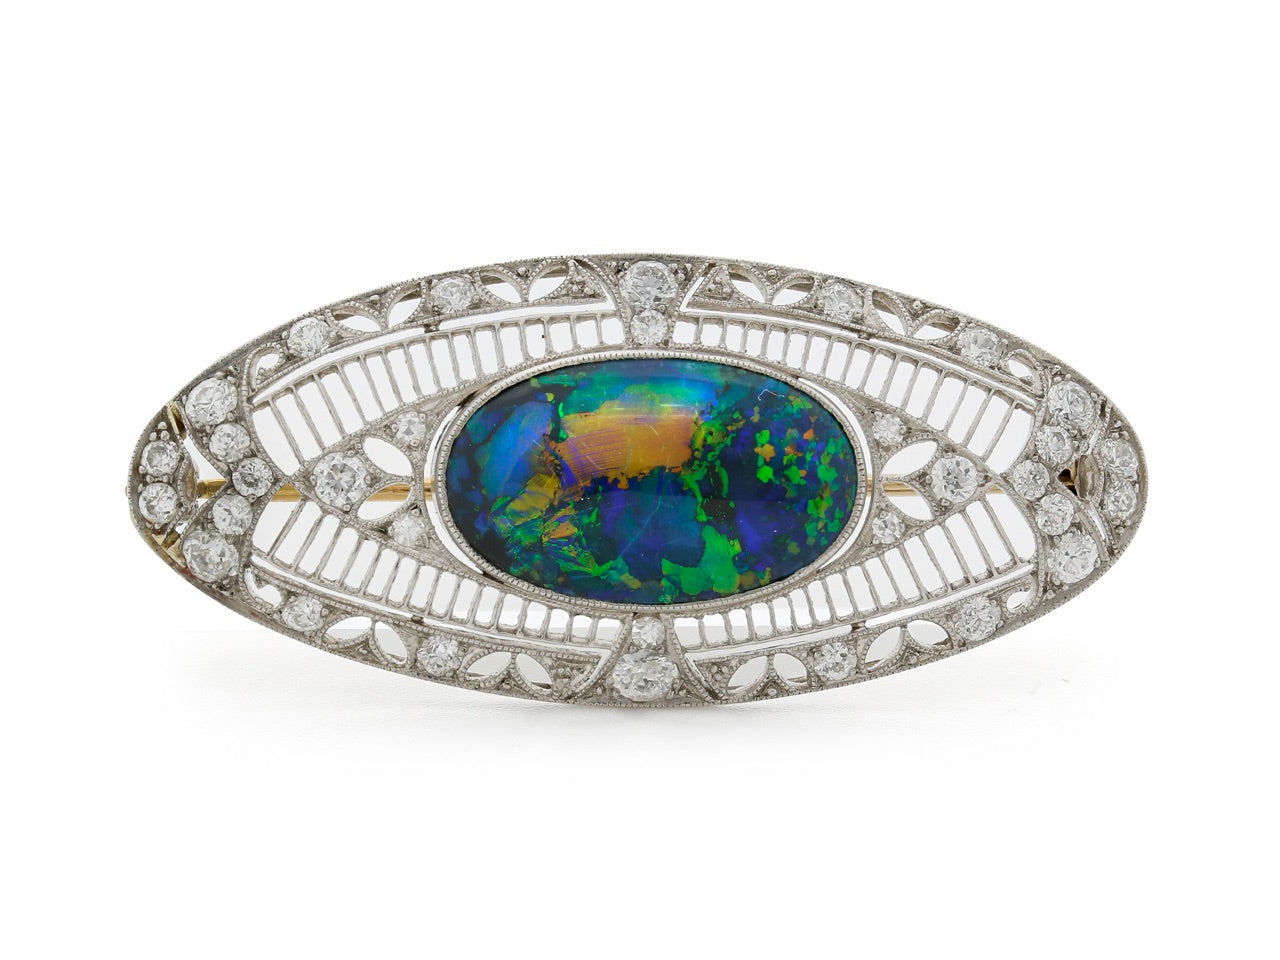 Marcus & Co. Black Opal and Diamond Brooch in Platinum